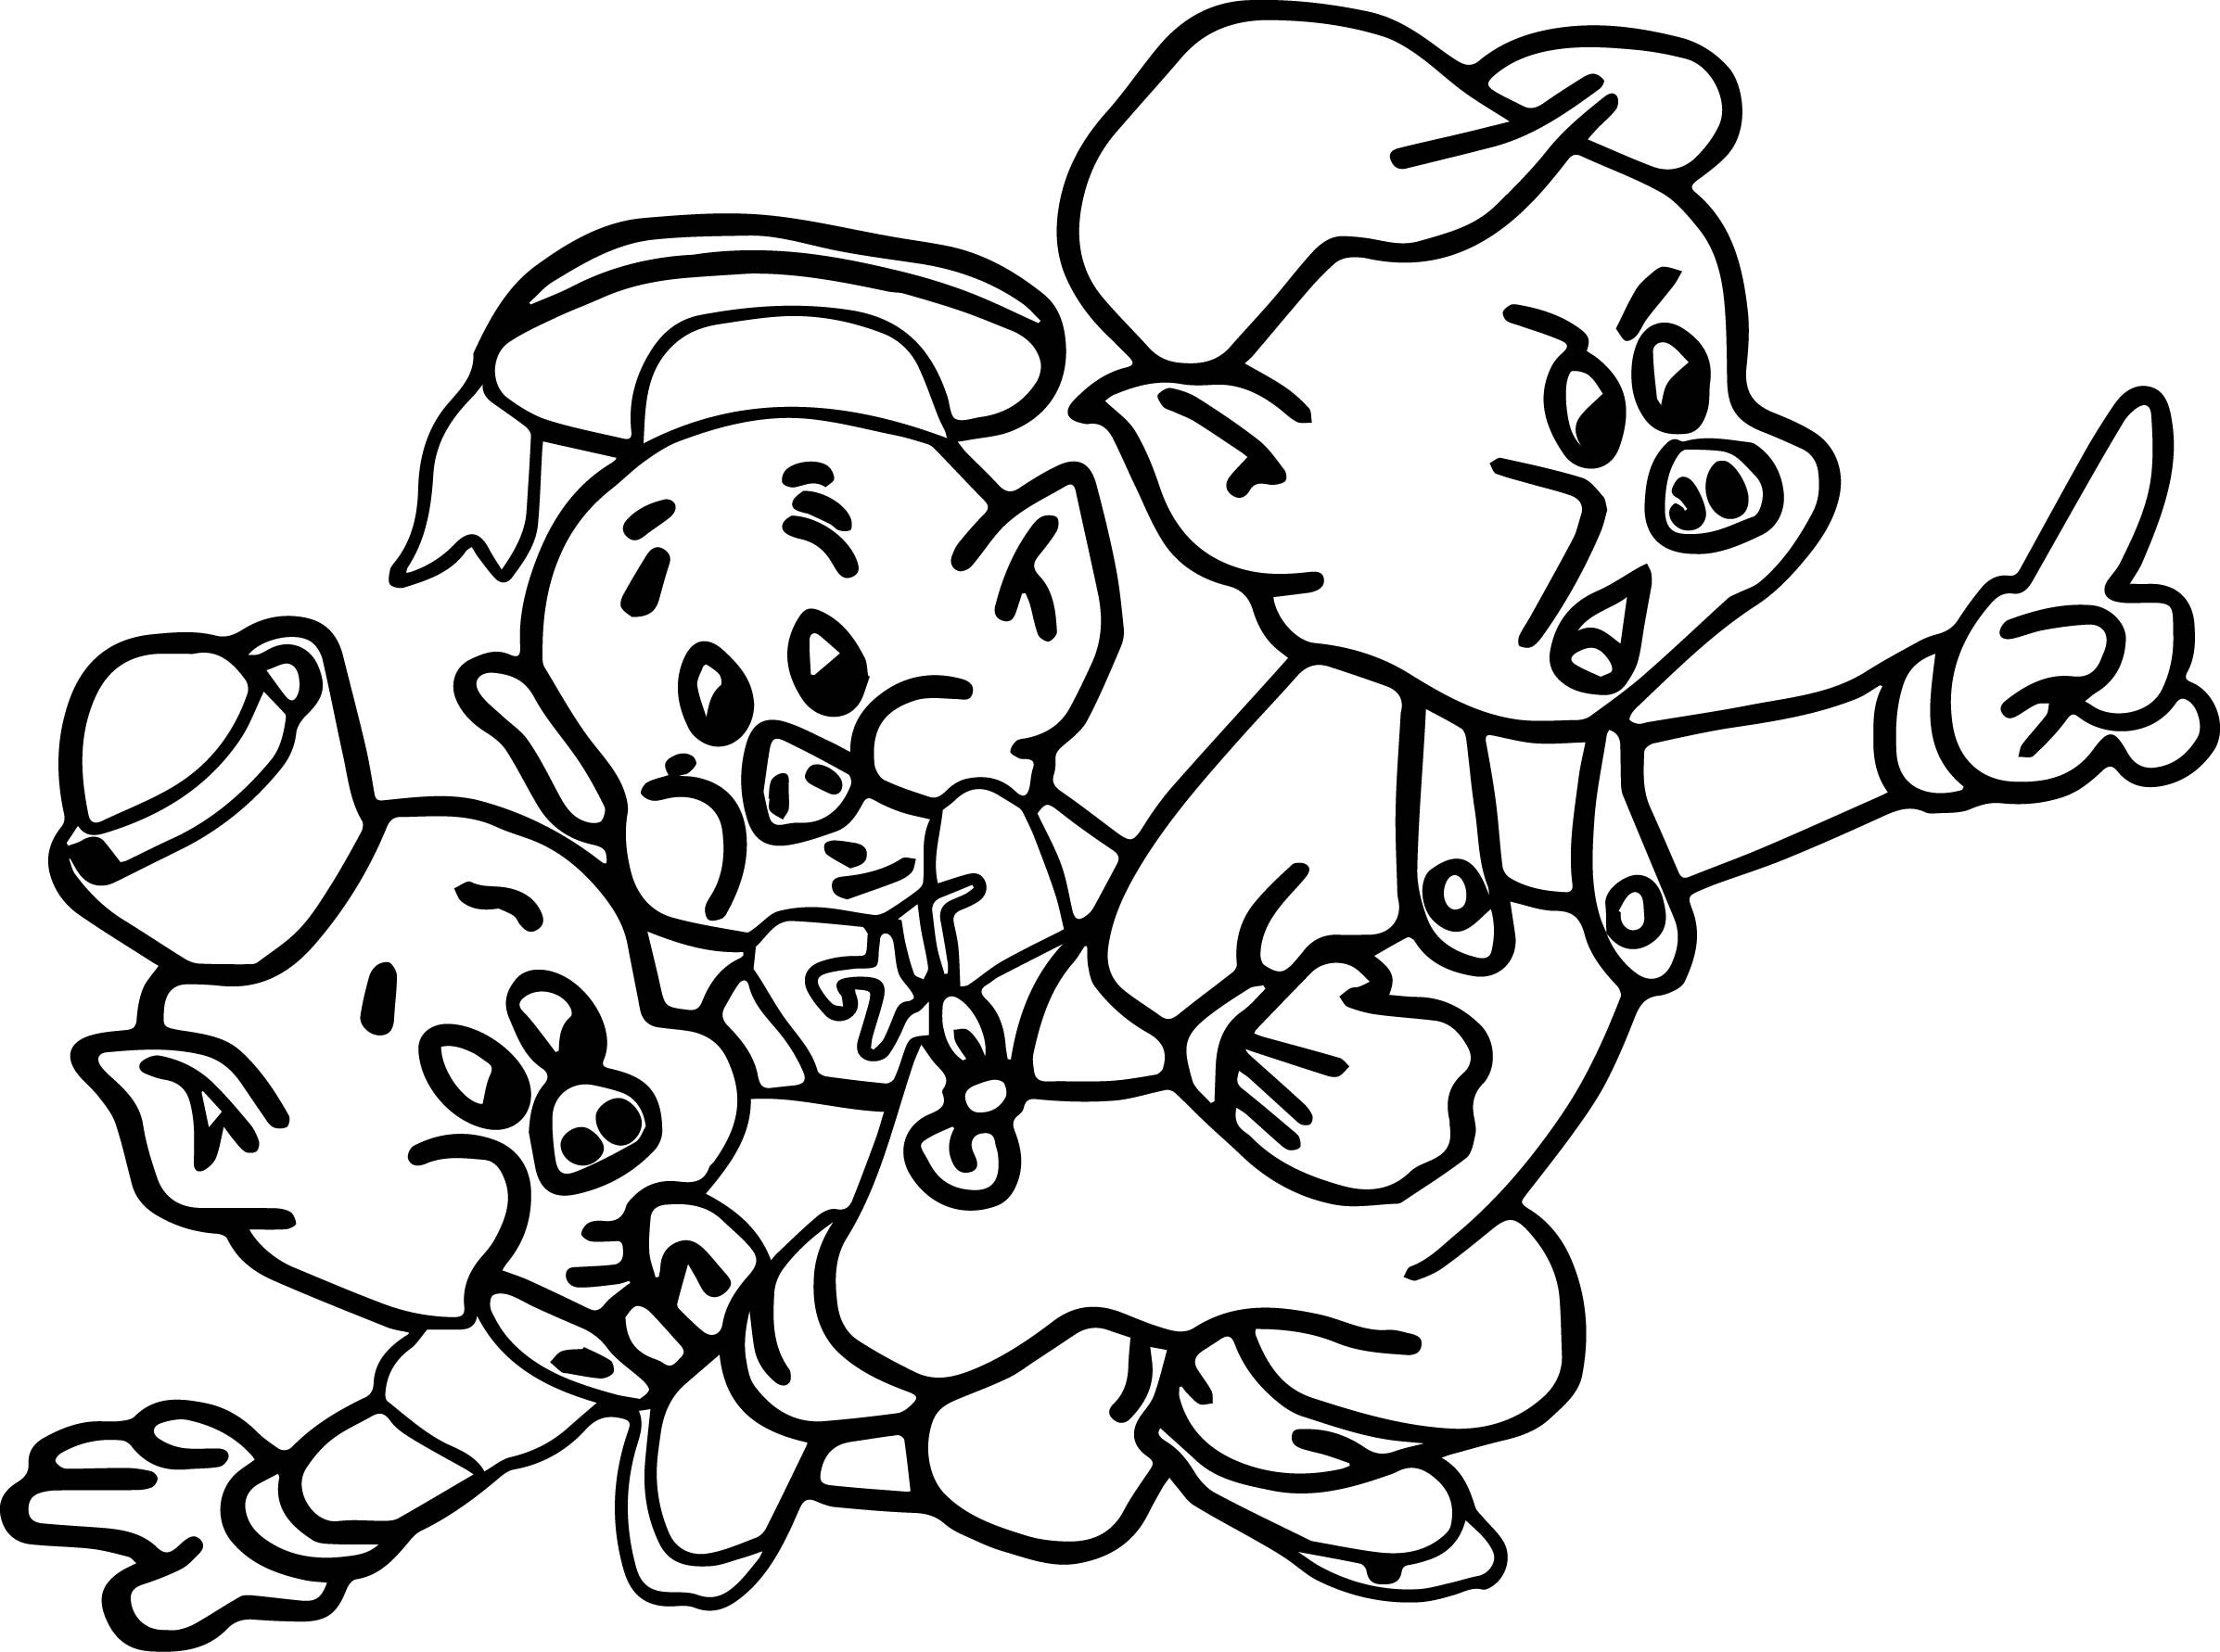 Preschool Coloring Sheets For The 3 Little Pigs Wolf
 Free Three Little Pigs Coloring Pages coloringsuite